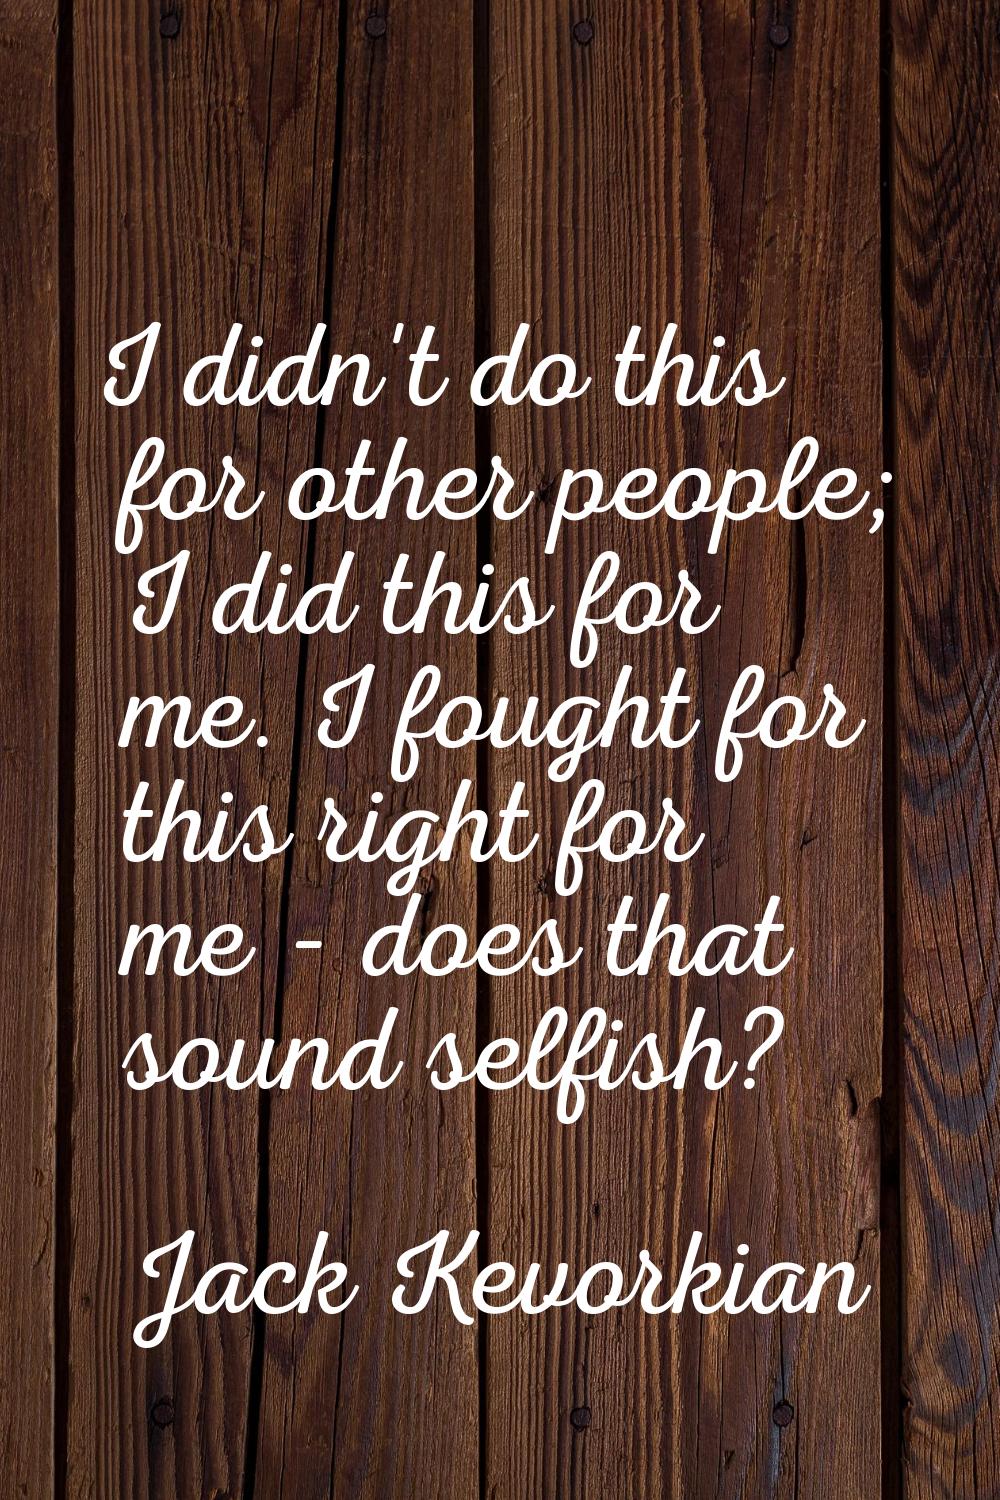 I didn't do this for other people; I did this for me. I fought for this right for me - does that so